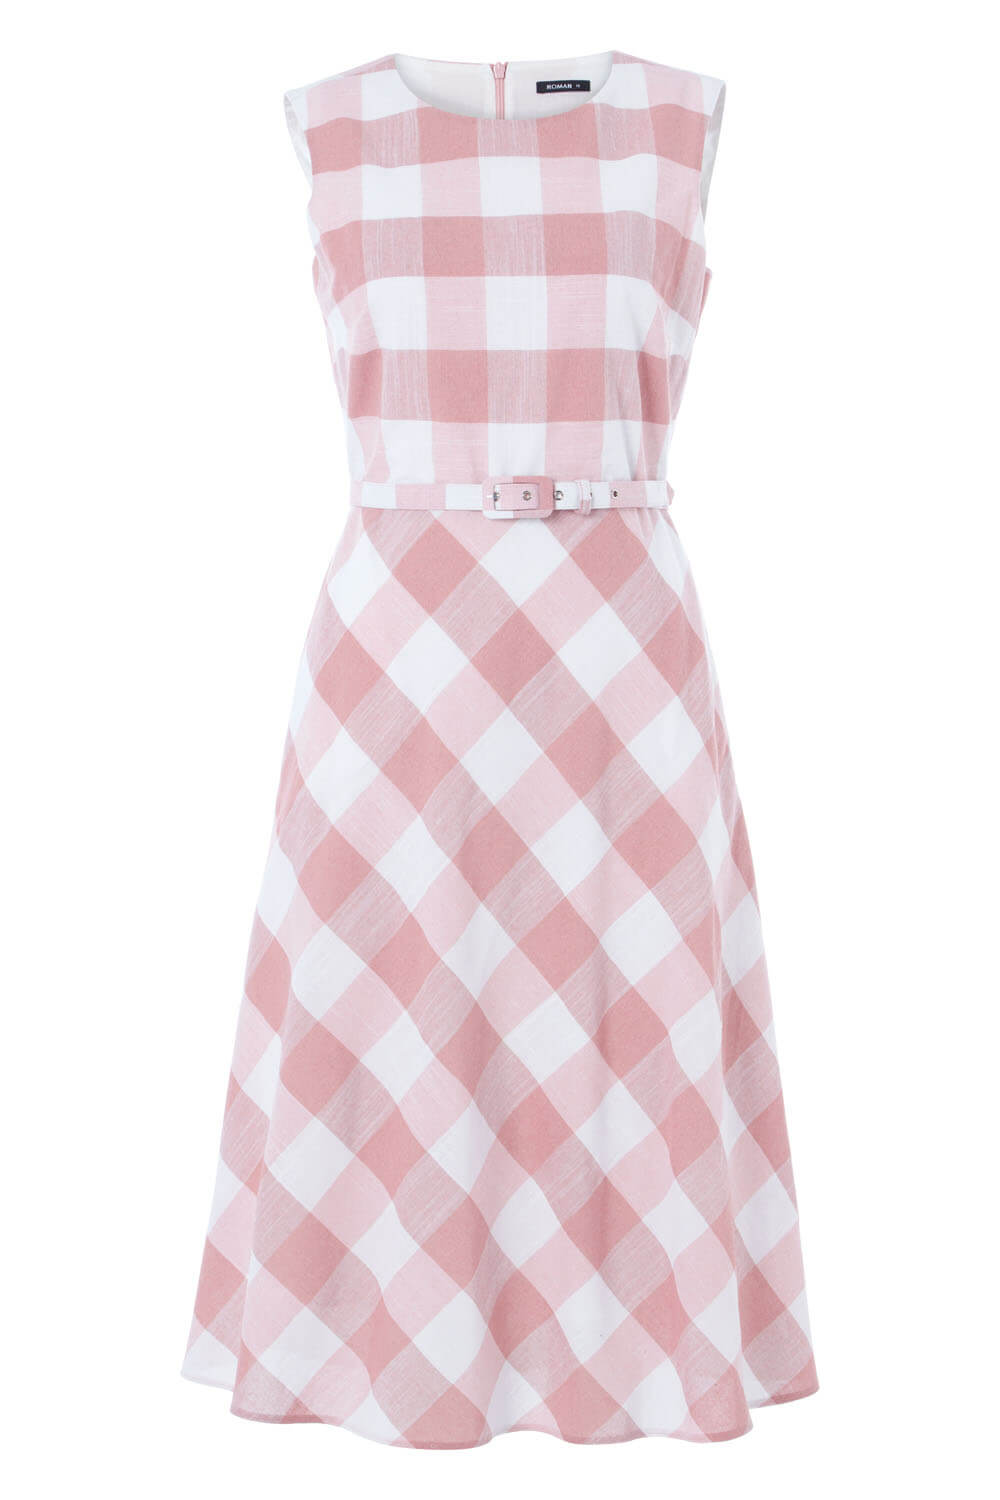 PINK Check Print Fit and Flare Dress, Image 5 of 5